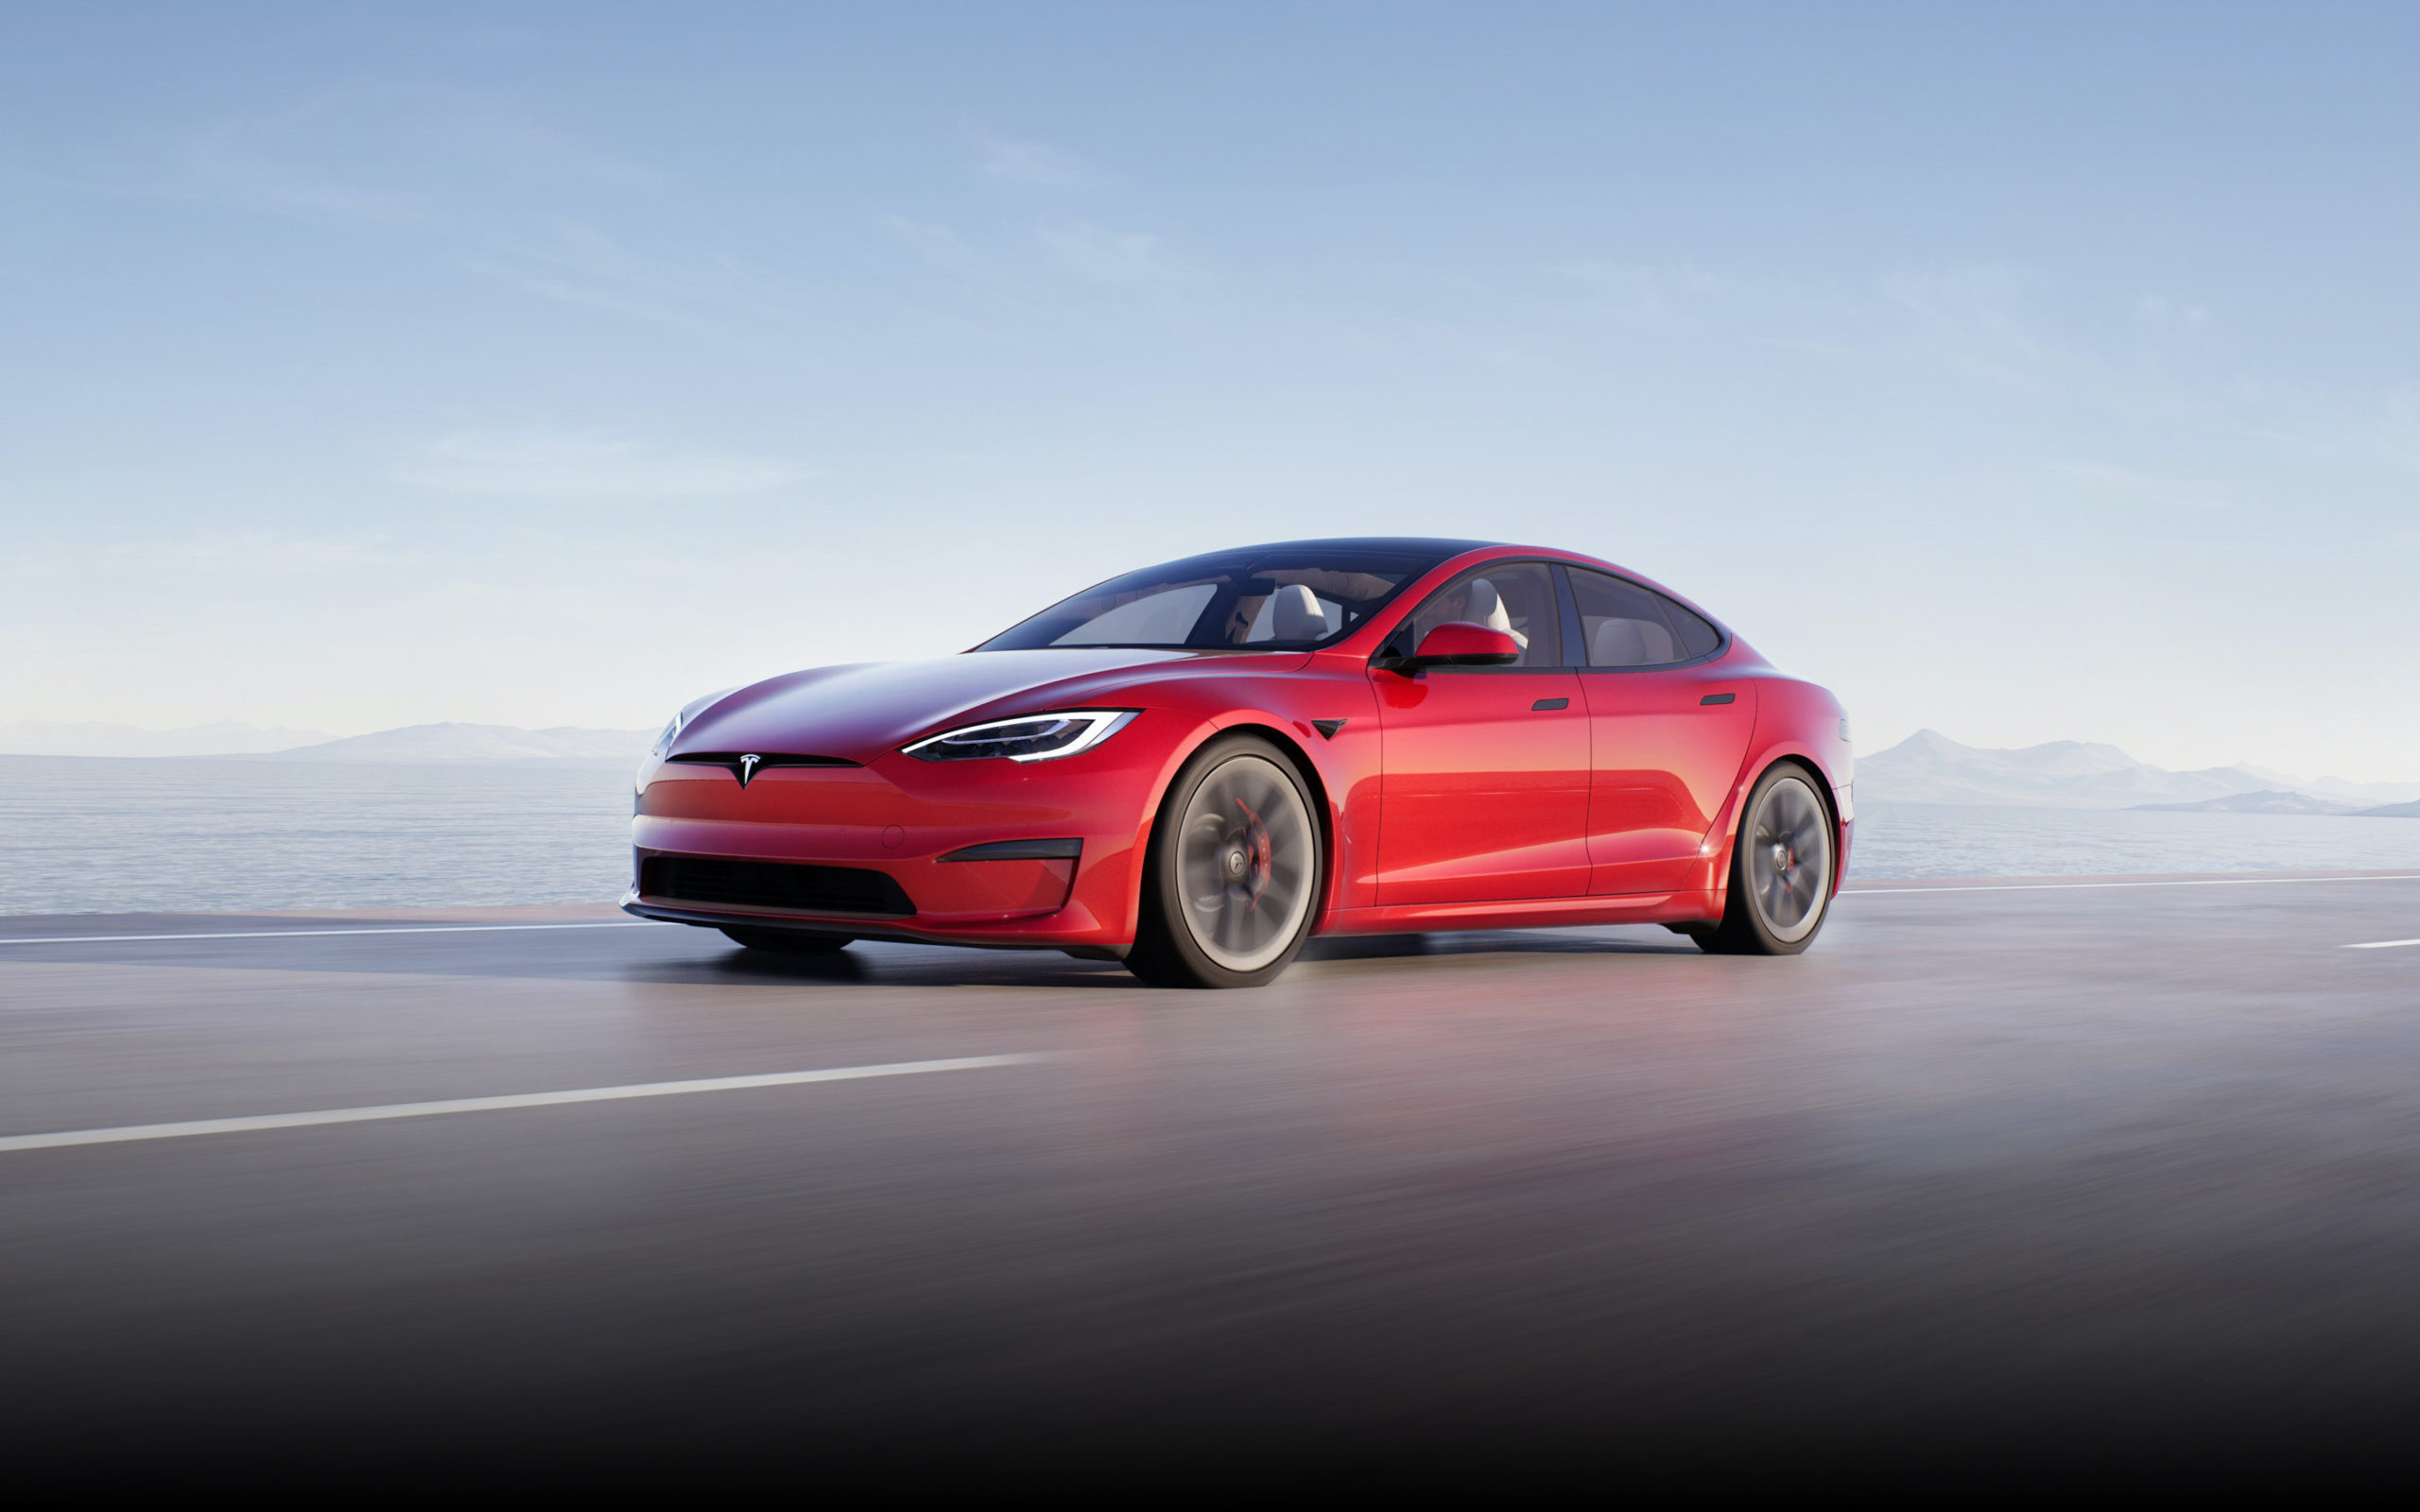 us-all-tesla-model-3-versions-qualify-for-7-500-federal-tax-credit-now